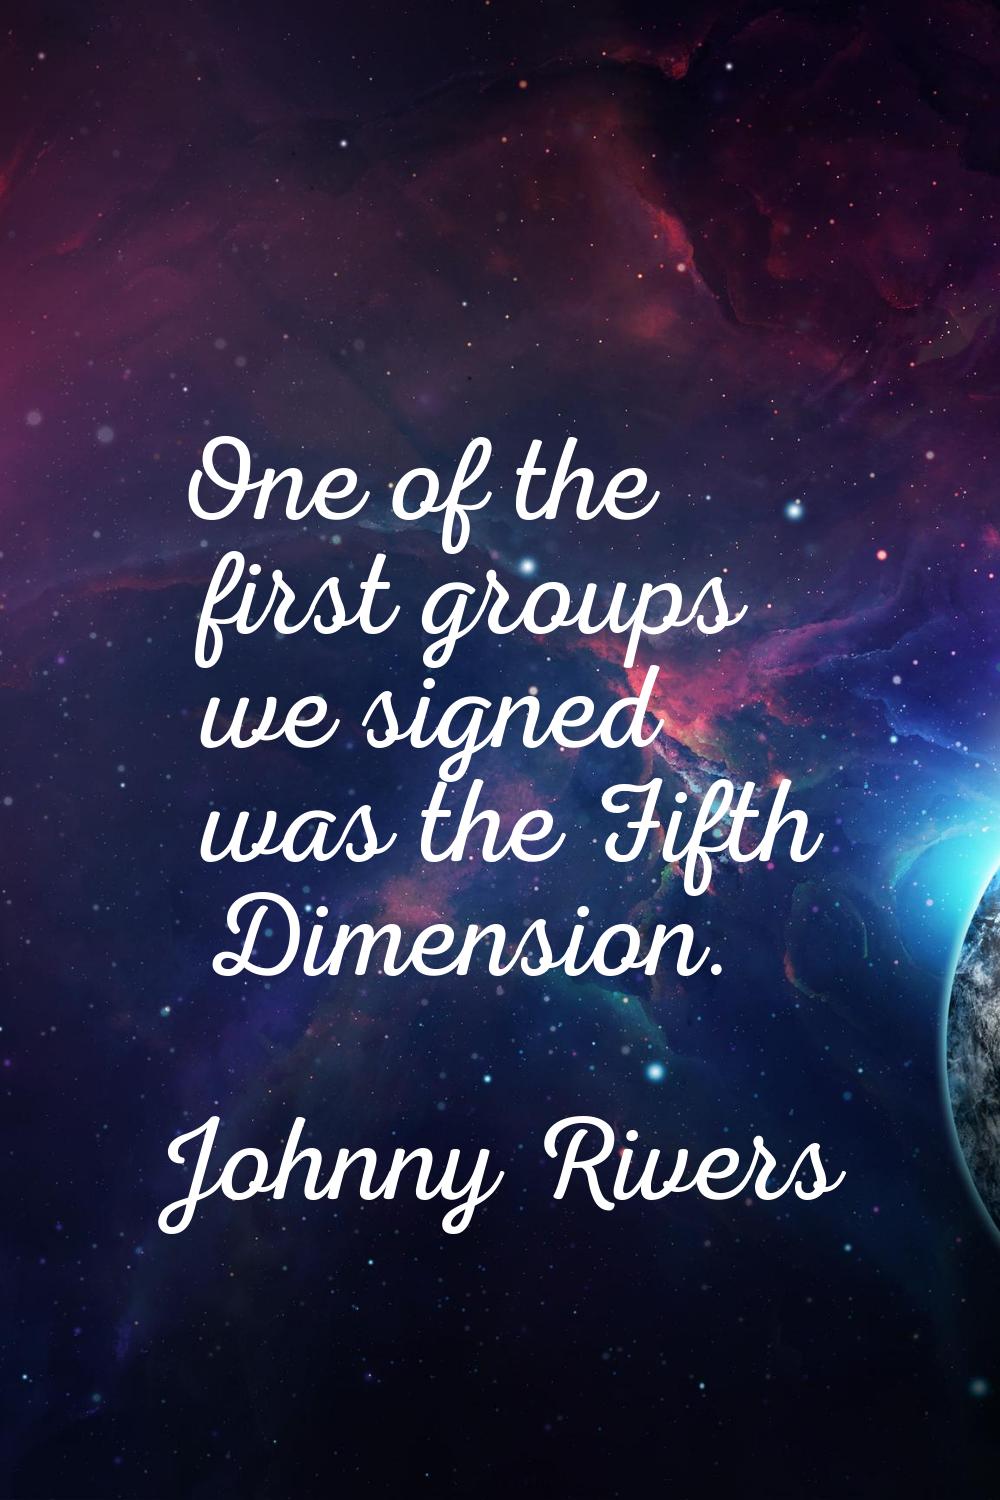 One of the first groups we signed was the Fifth Dimension.